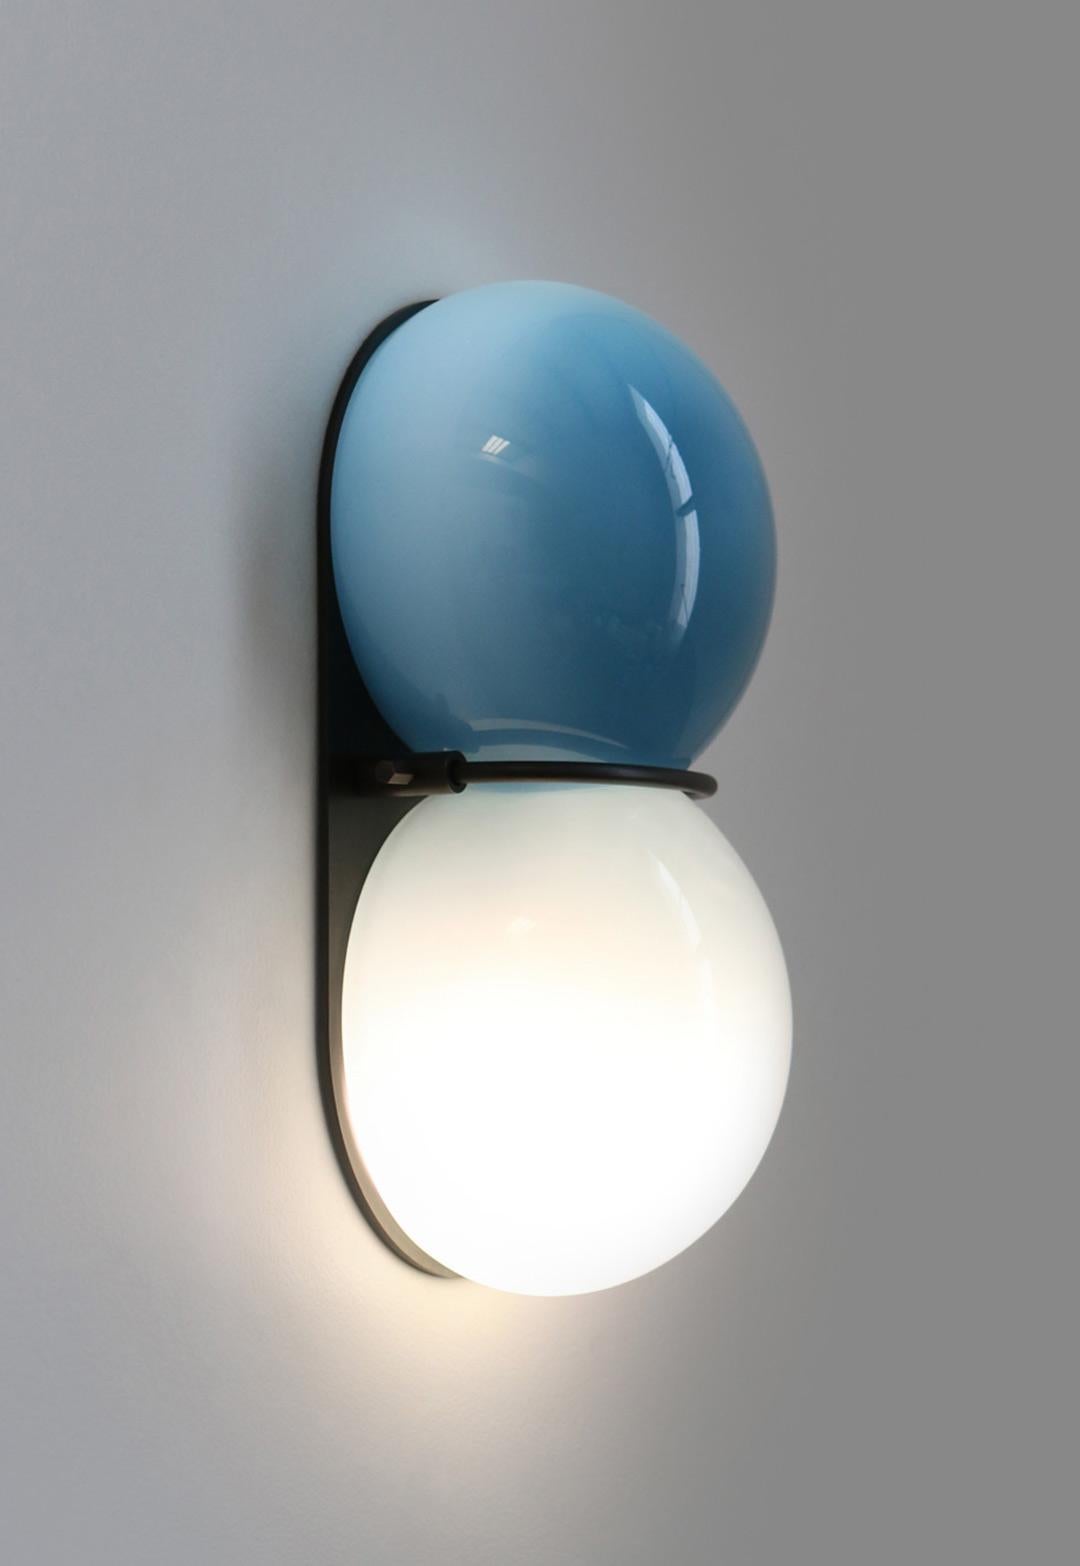 The Twin 1.0 Sconce features a two-tone diffuser of handblown Czech glass made up of two flattened spherical shapes in two colors which are melded together while hot on the glass blowing pipe. The glass is held to a solid brass plate canopy by a